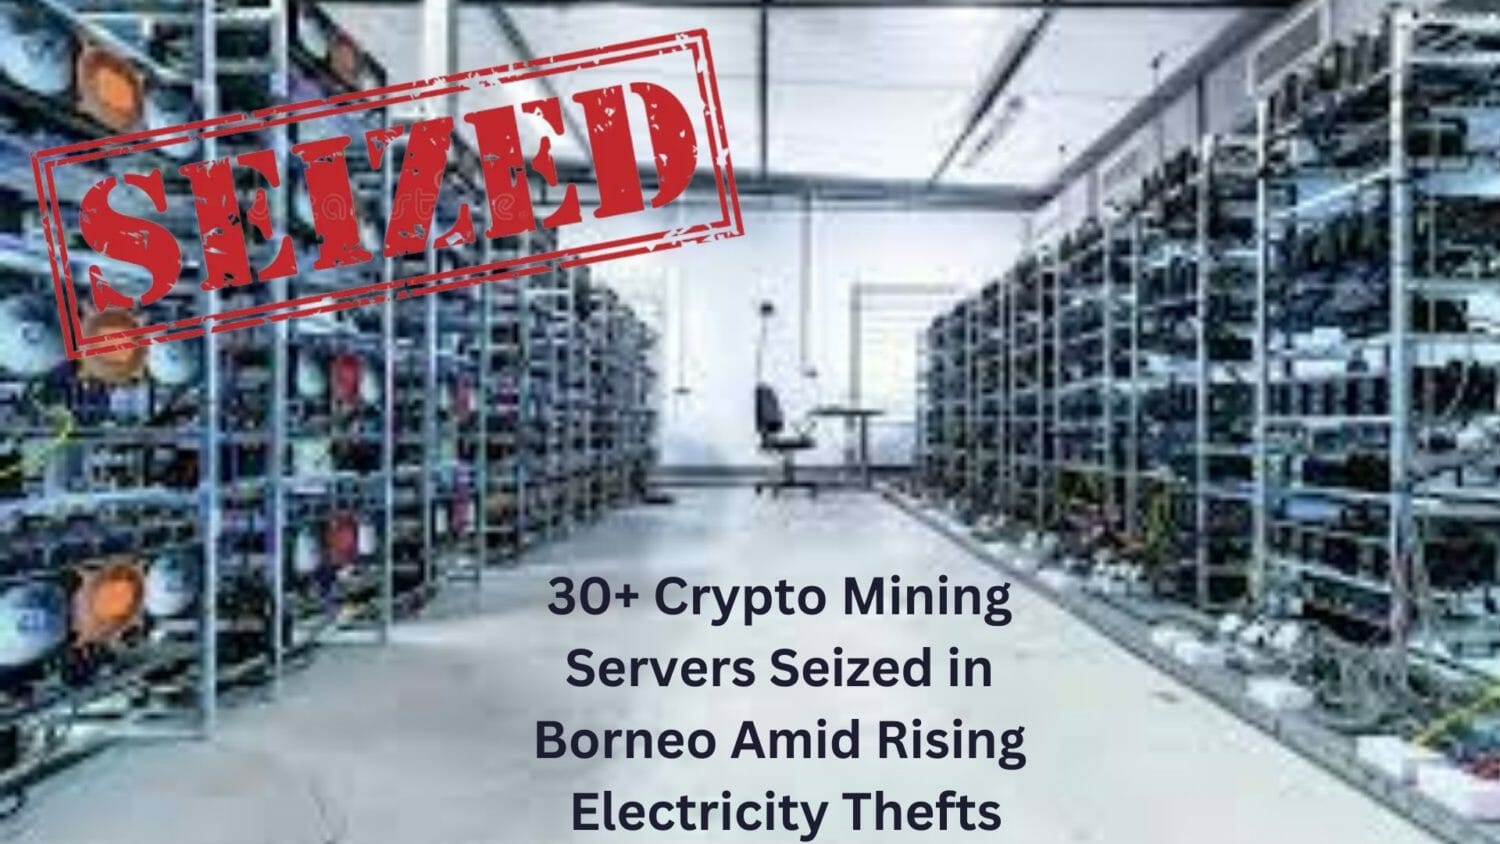 30+ Crypto Mining Servers Seized In Borneo Amid Rising Electricity Thefts